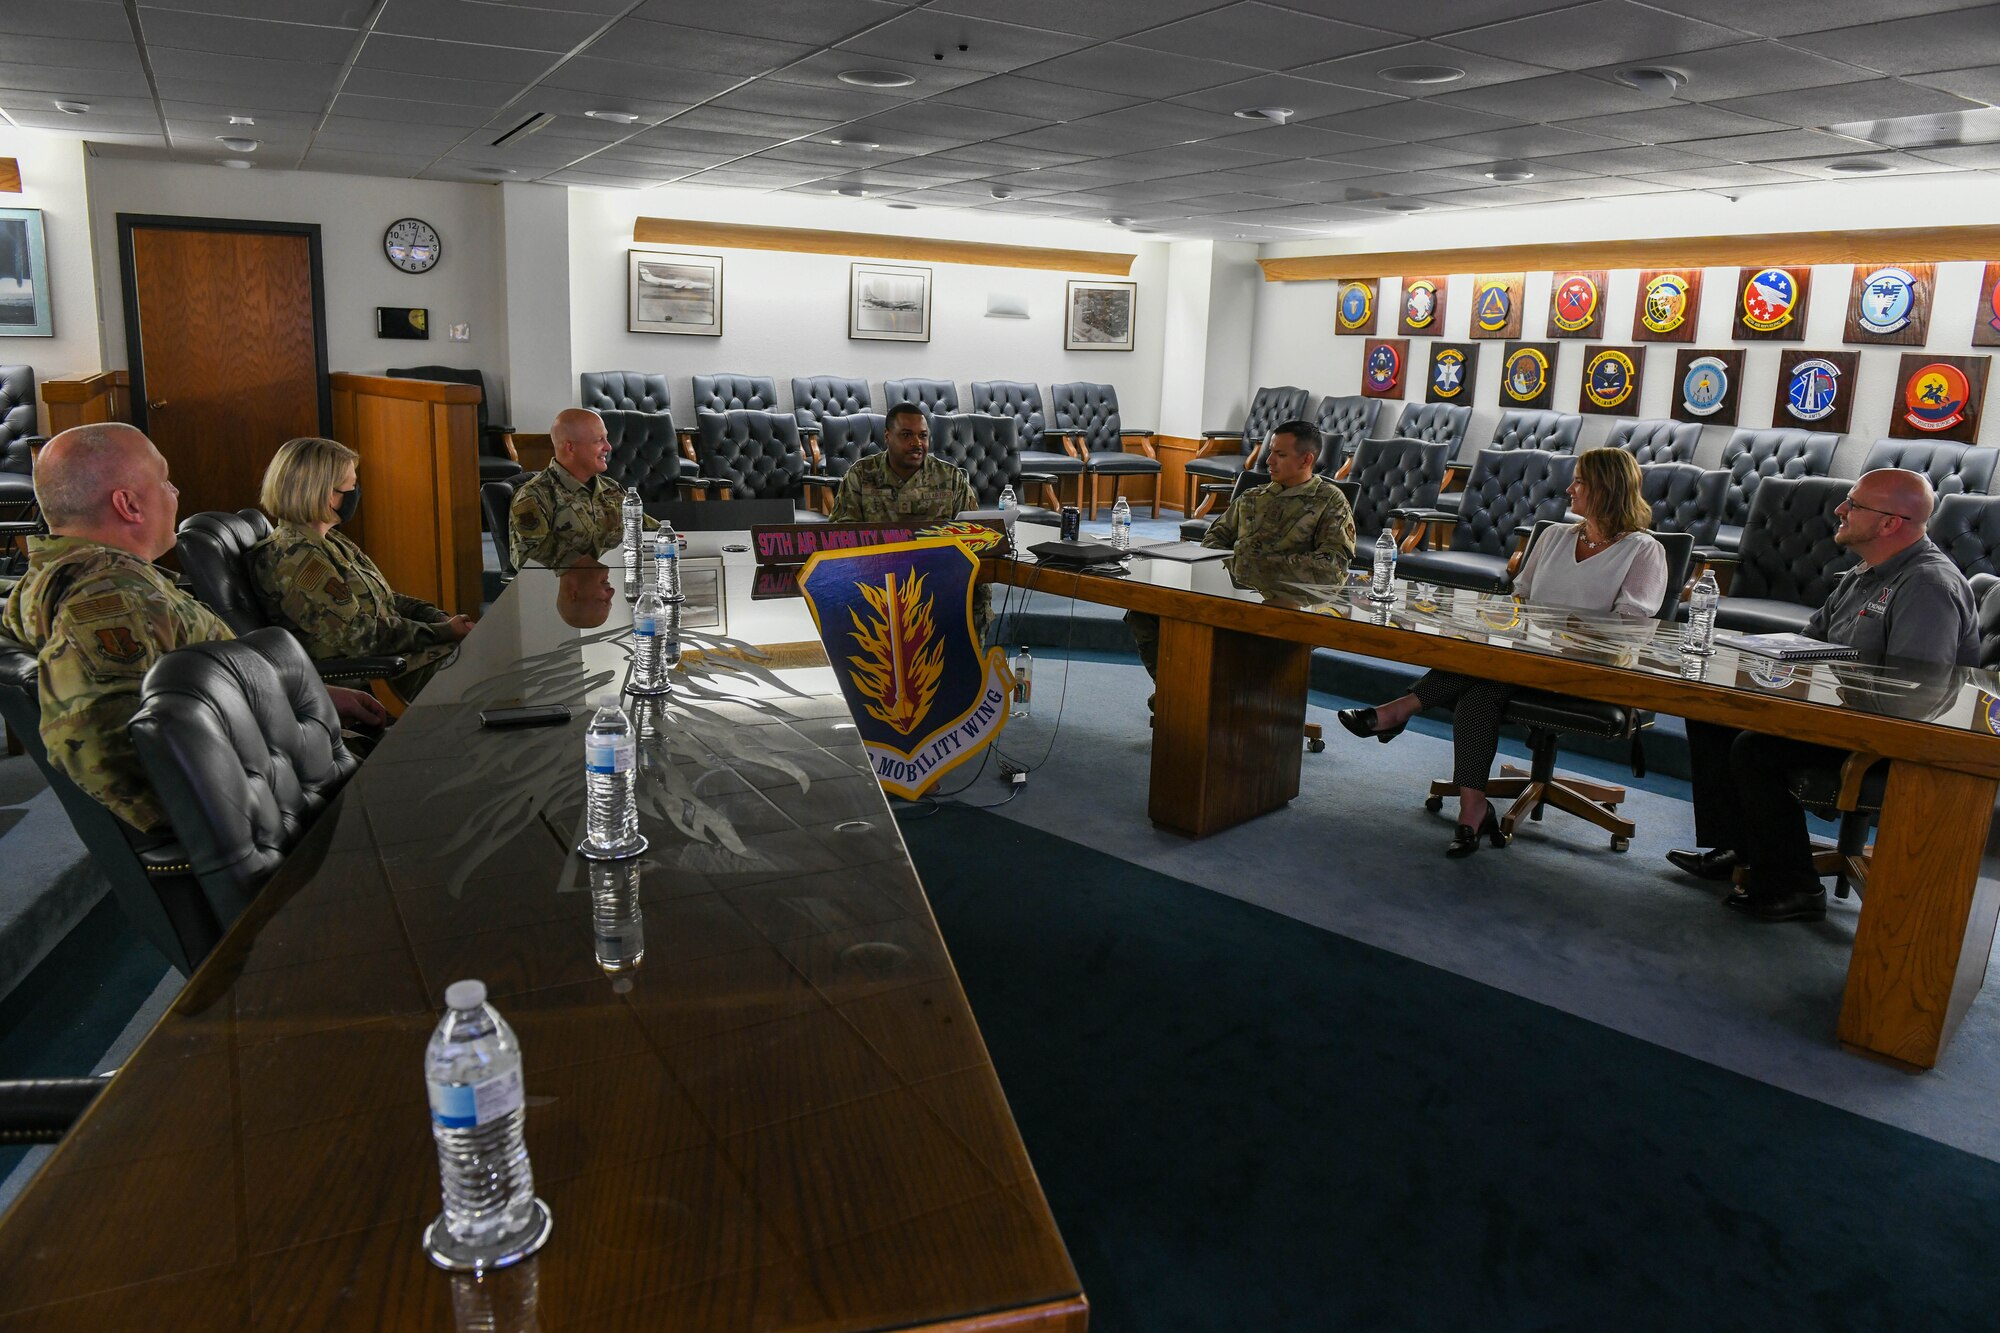 Chief Master Sgt. Kevin Osby, senior enlisted advisor for the Army and Air Force Exchange Service (AAFES), discusses with 97th Air Mobility Wing and Exchange service leaders at Altus Air Force Base, Oklahoma, August 3, 2022. Osby’s visit was focused on how AAFES can improve the quality of life for the Altus community. (U.S. Air Force photo by Airman 1st Class Trenton Jancze)